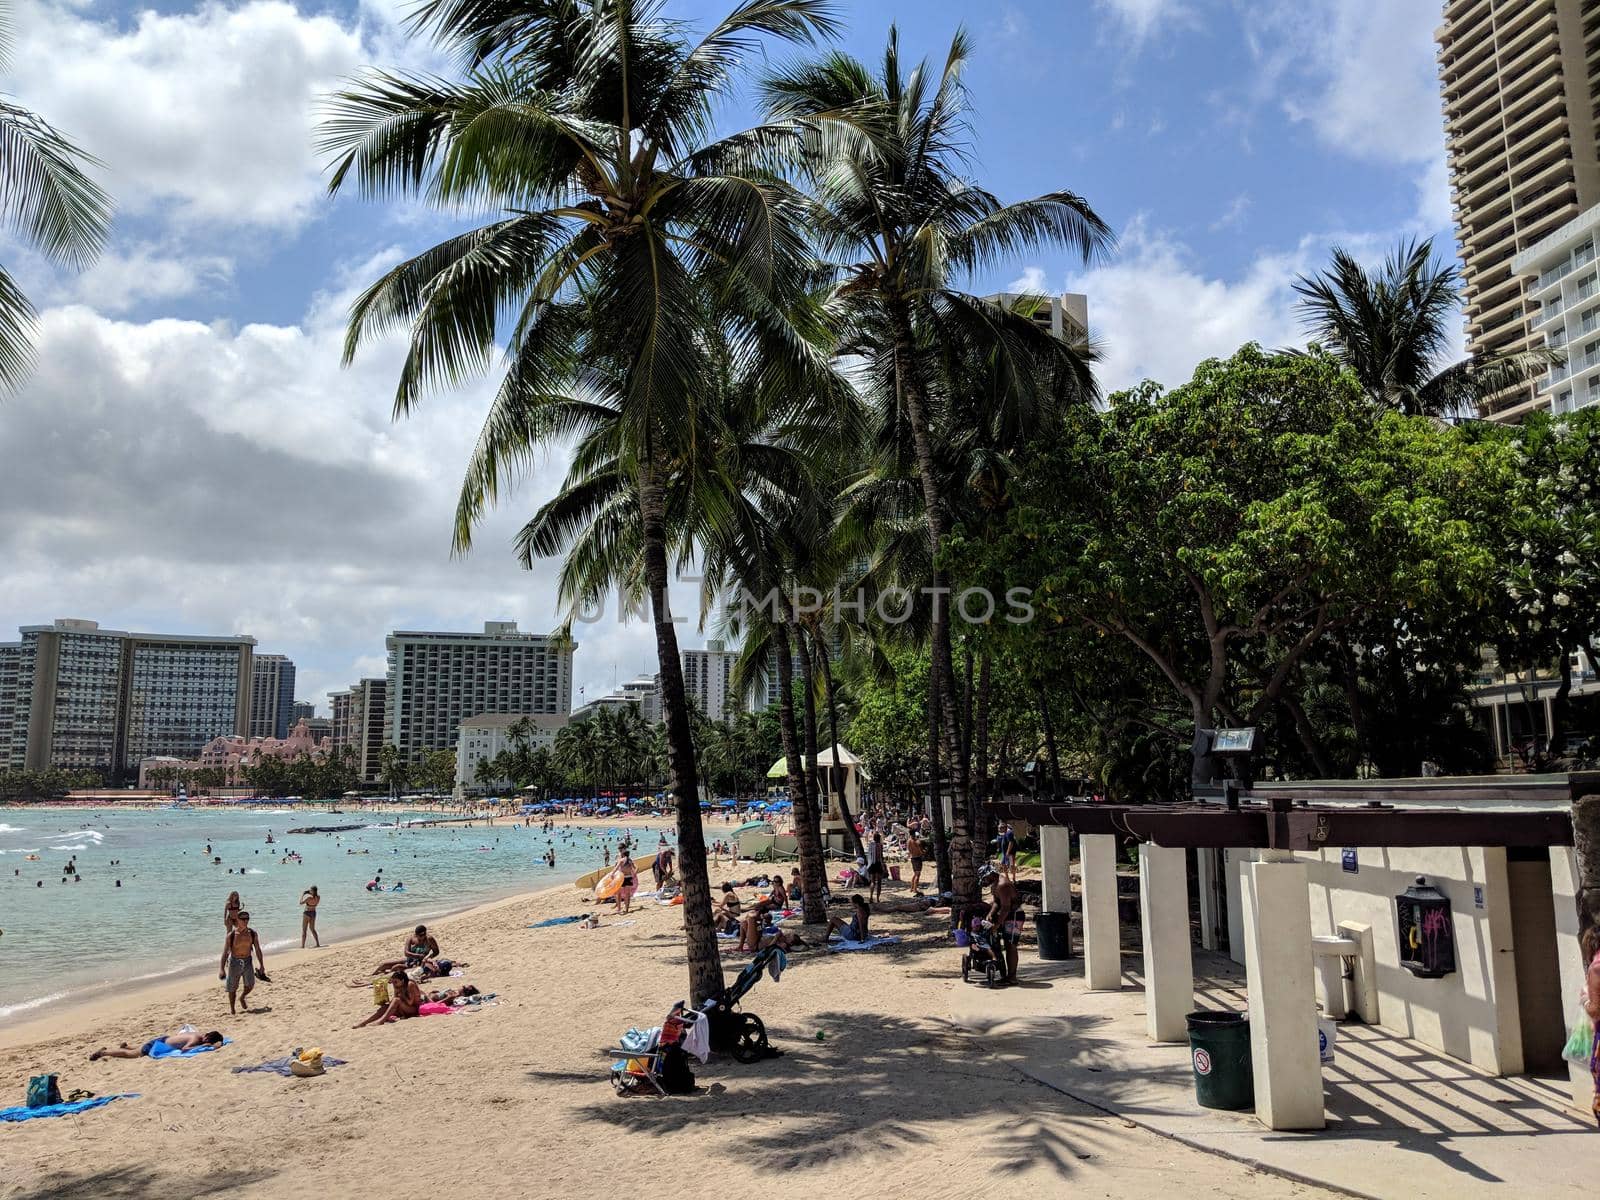 Waikiki, Hawaii - July 19, 2018: People play in the protected water and hang out by bathrooms on the beach in world famous tourist area Waikiki on a beautiful day with hotels in the distance. 